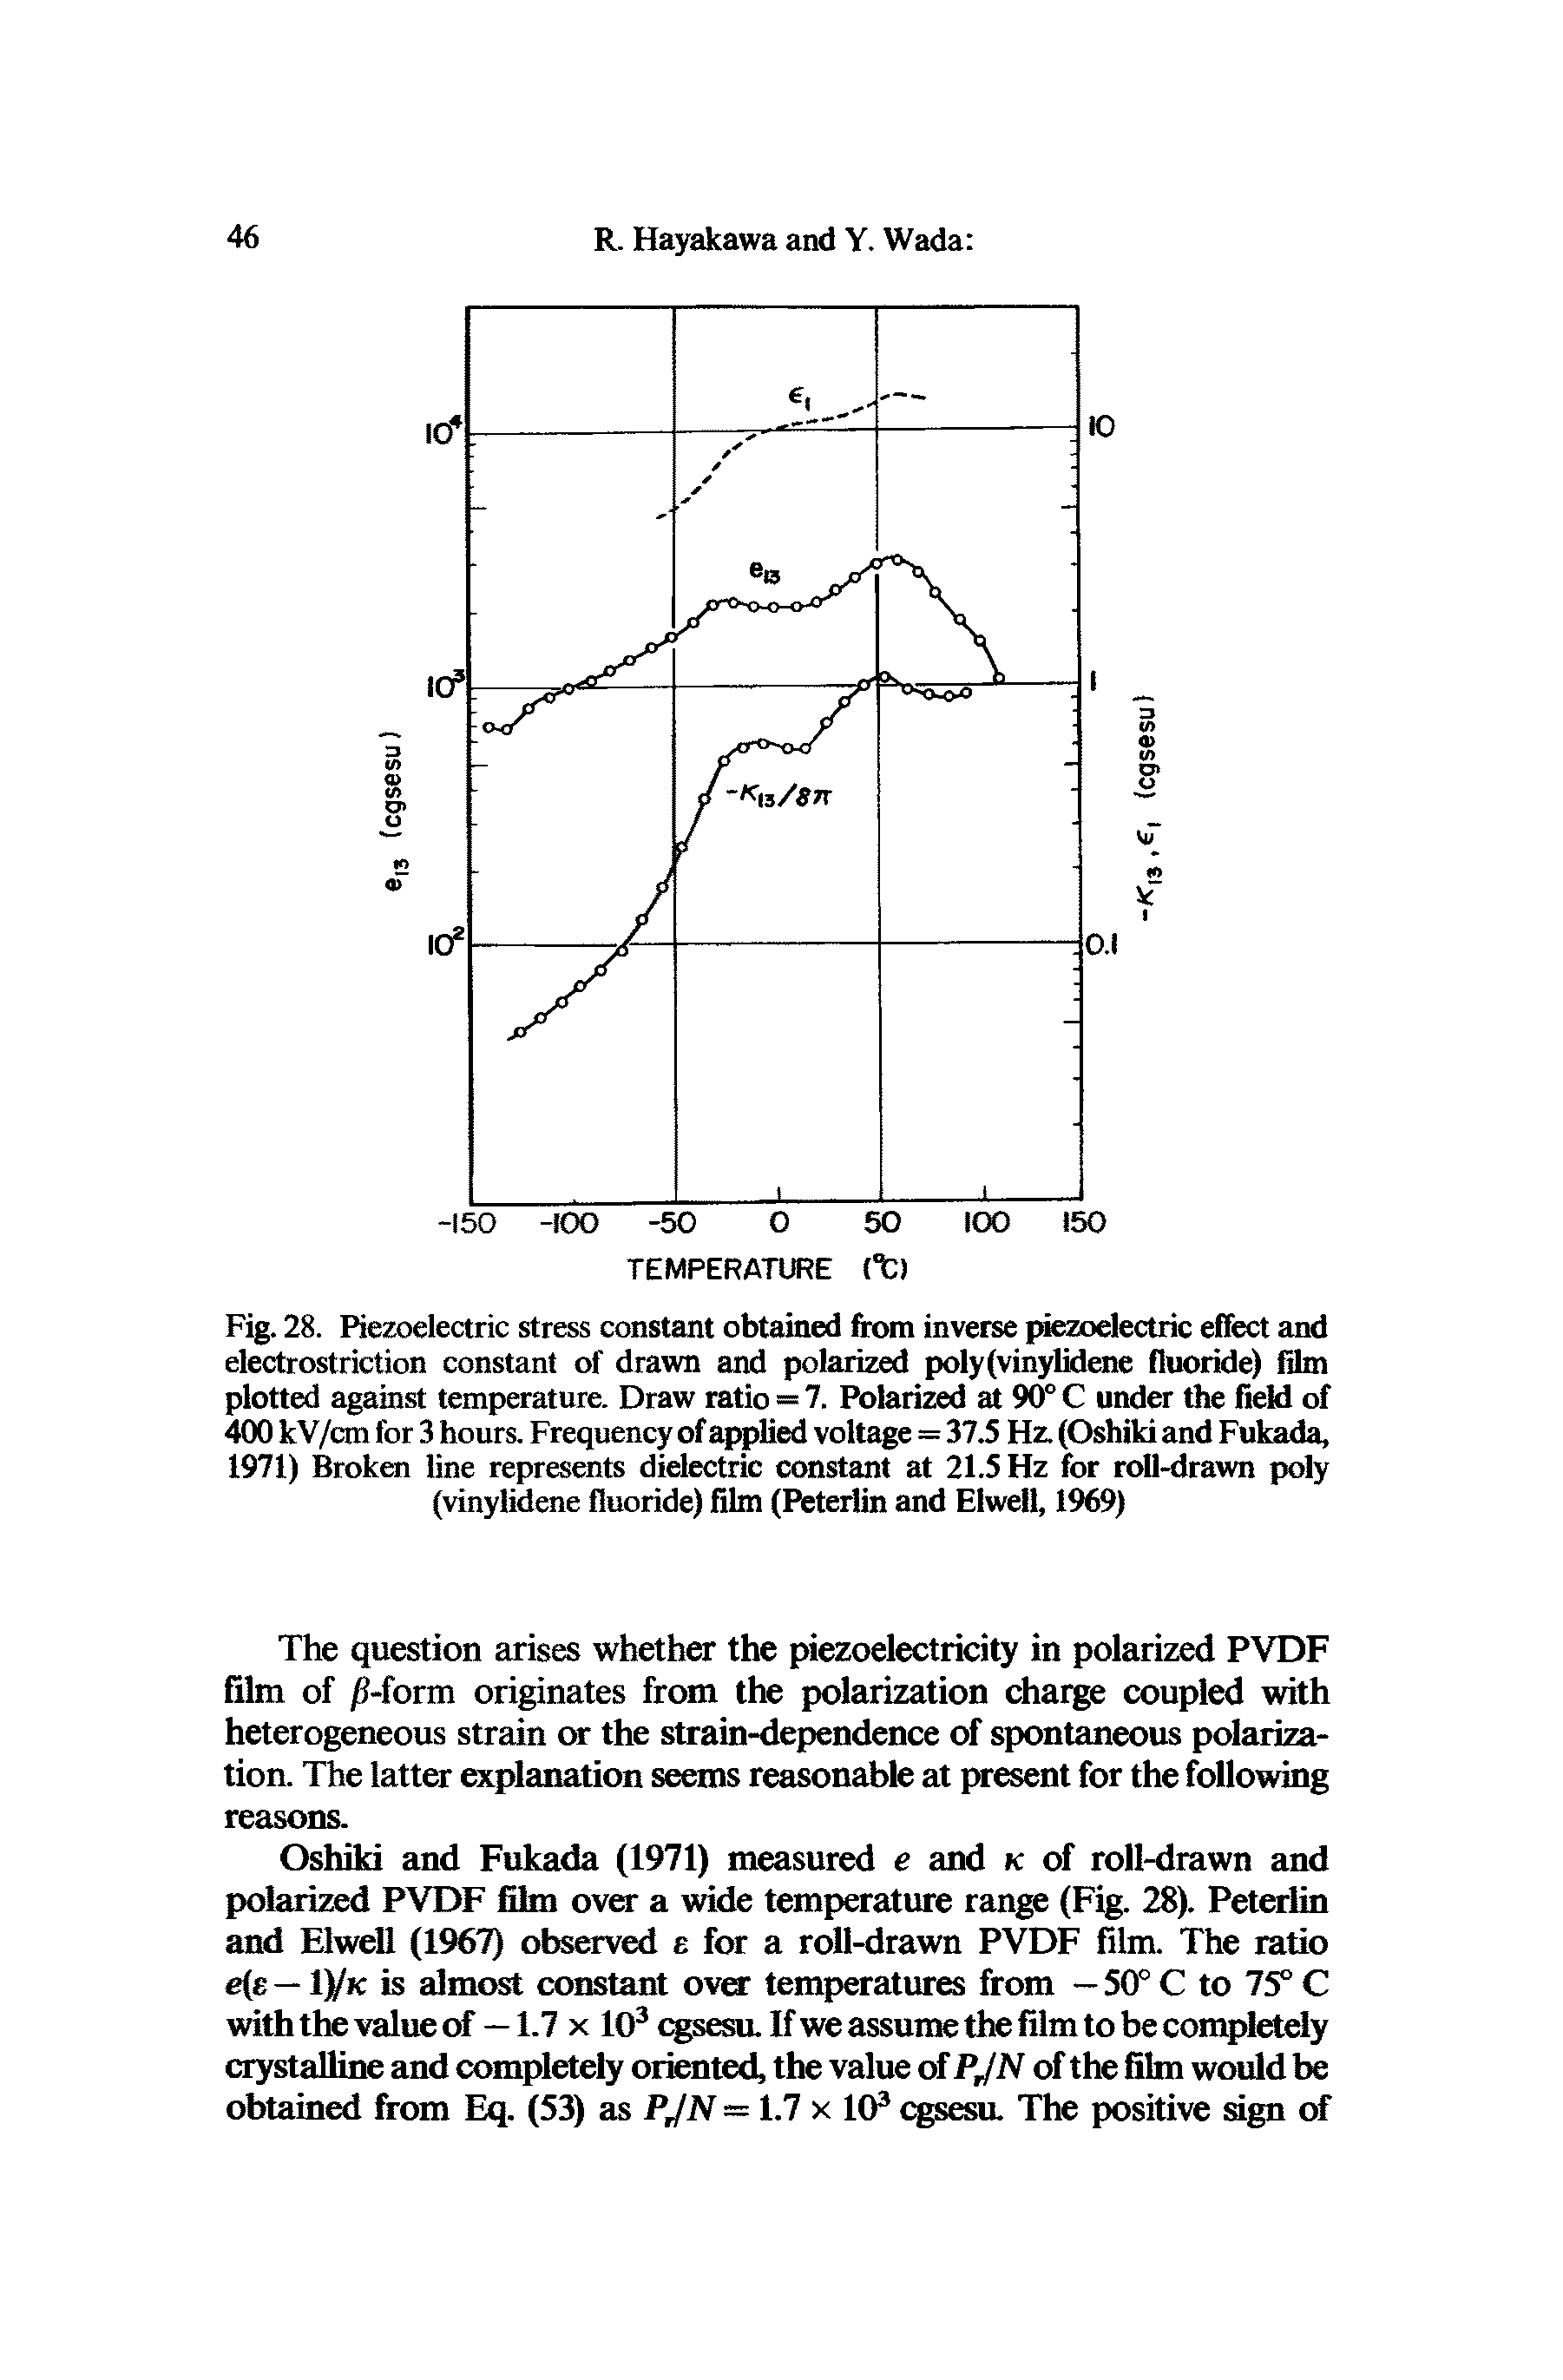 Fig. 28. Piezoelectric stress constant obtained from inverse piezoelectric effect and electrostriction constant of drawn and polarized poly(vinylidene fluoride) film plotted against temperature. Draw ratio = 7. Polarized at 90° C under the field of 400 kV/ctn for 3 hours. Frequency of applied voltage = 37.5 Hz. (Oshiki and Fukada, 1971) Broken line represents dielectric constant at 21.5 Hz for roll-drawn poly (vinylidene fluoride) film (Peterlin and Eiweil, 1969)...